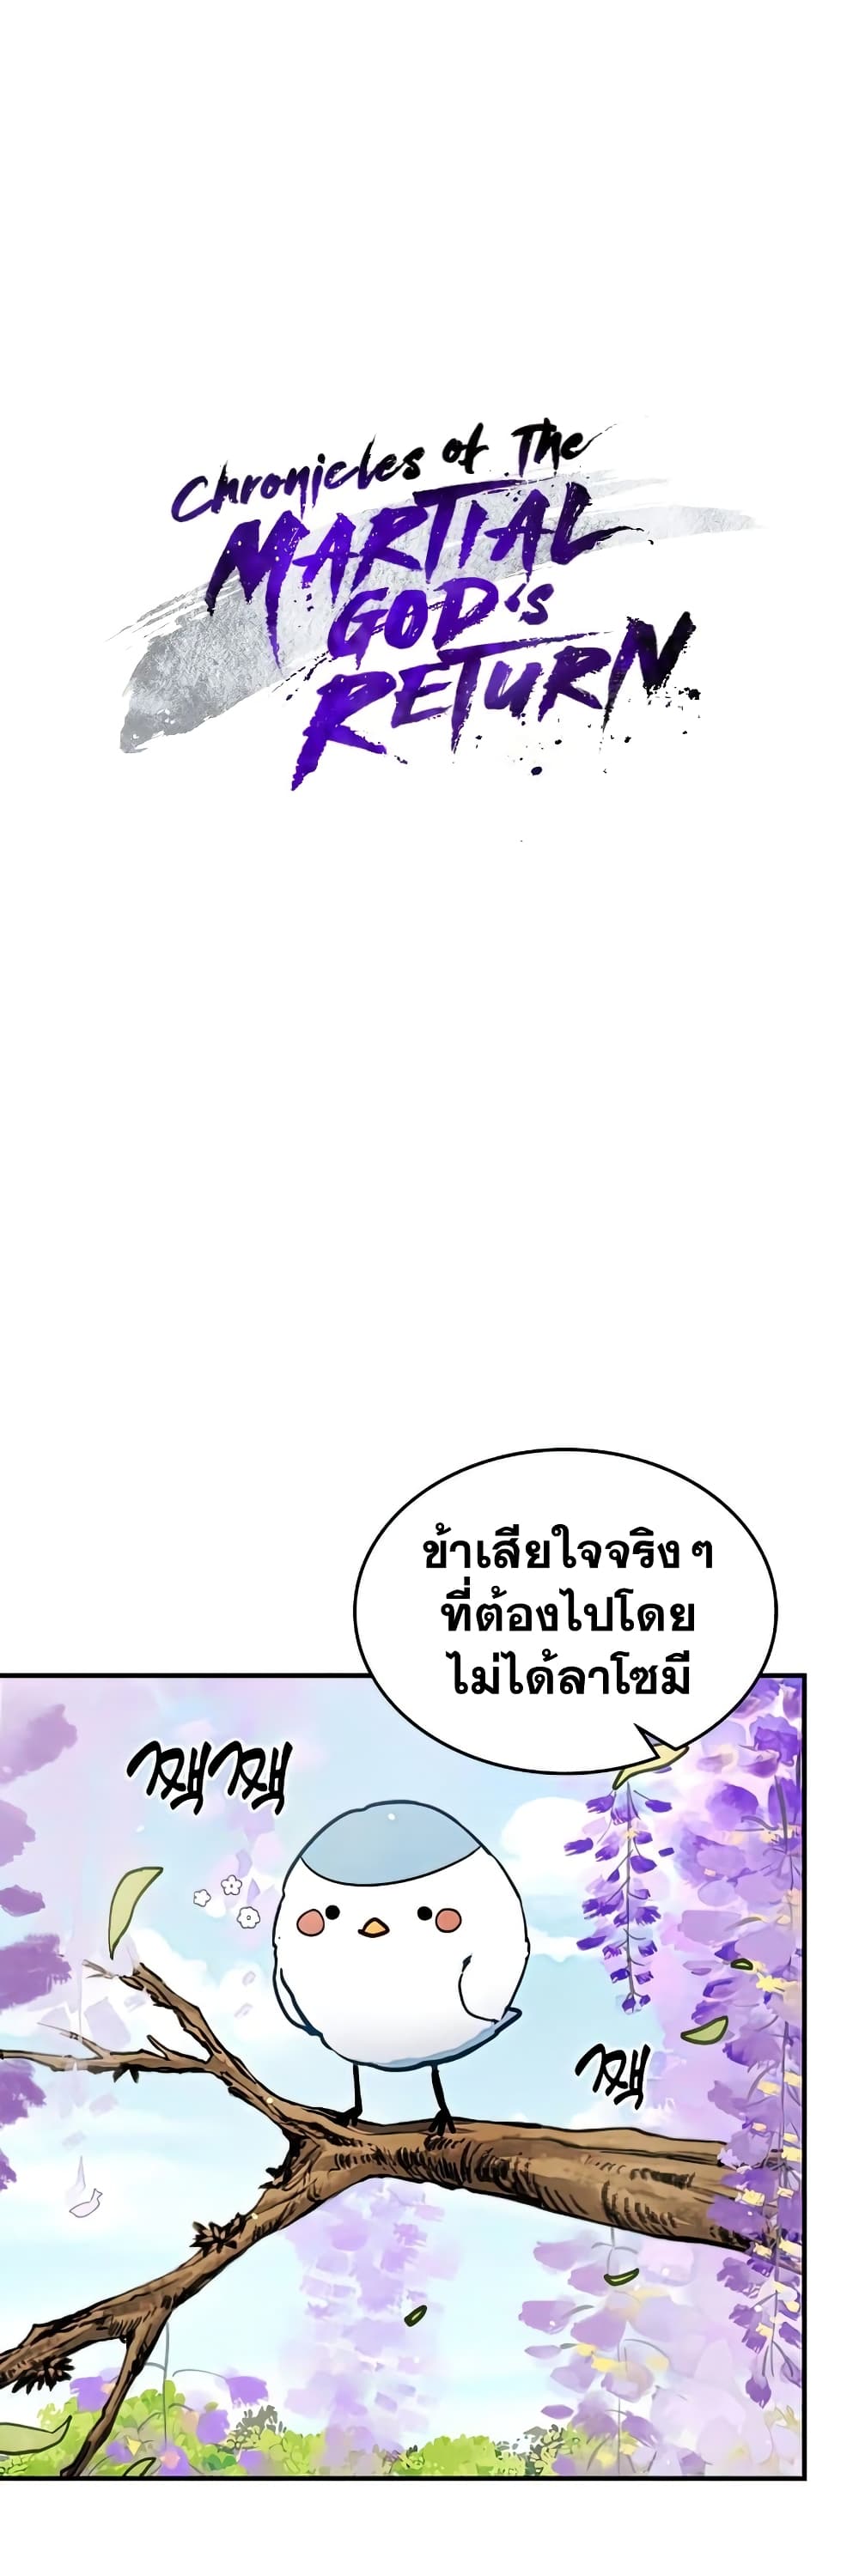 Chronicles Of The Martial Godโ€s Return เธ•เธญเธเธ—เธตเน 23 (2)